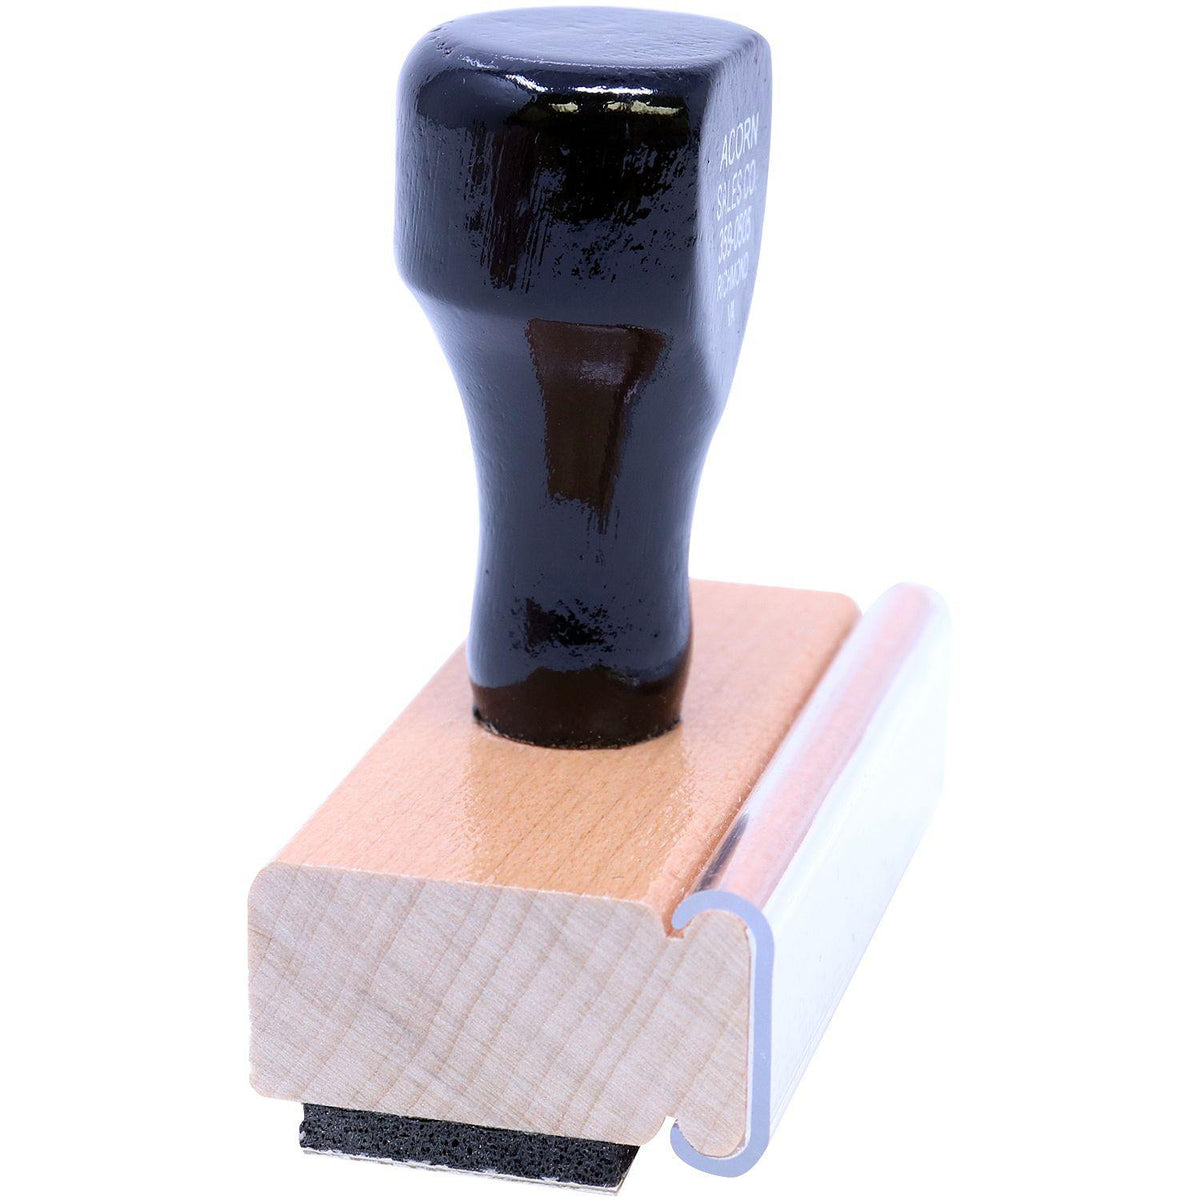 Side View of Large Past Due Rubber Stamp at an Angle